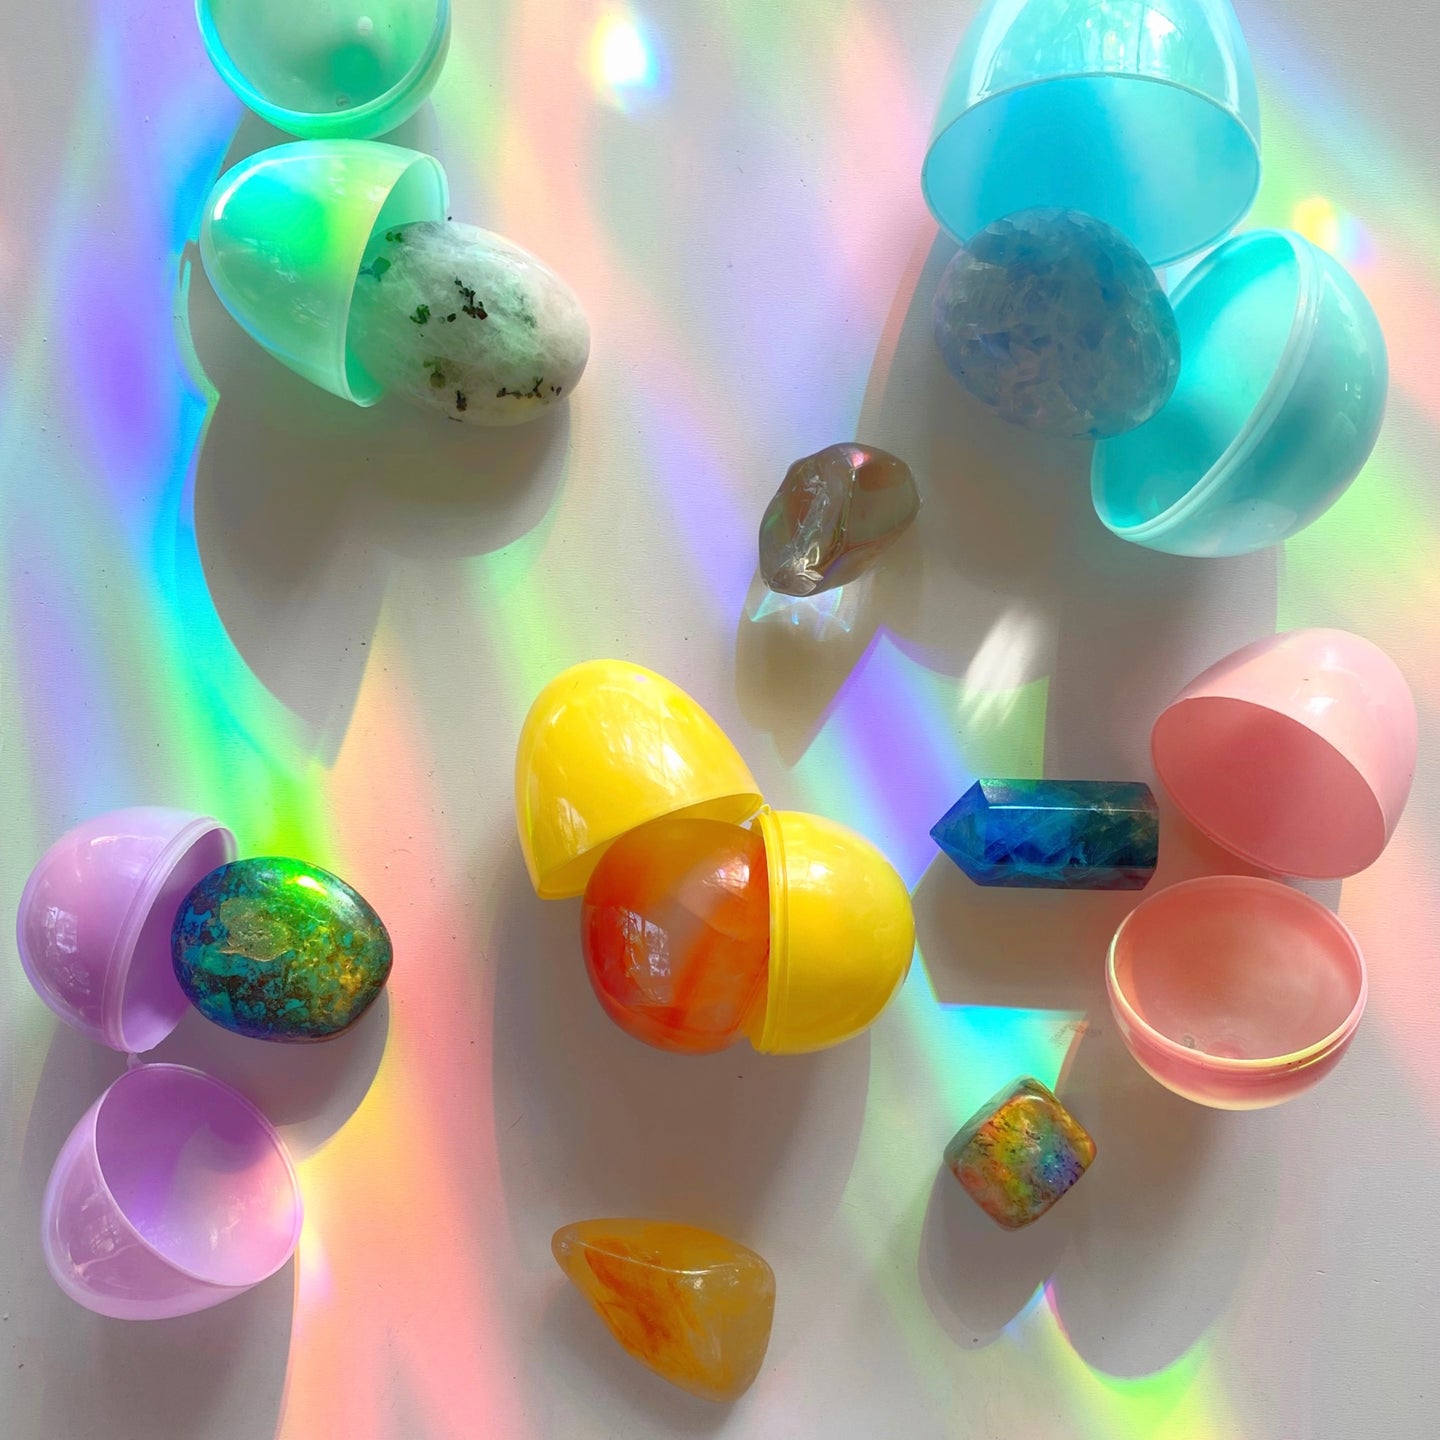 rainbows cascading over a pastel colored Easter opened eggs with crystals inside 